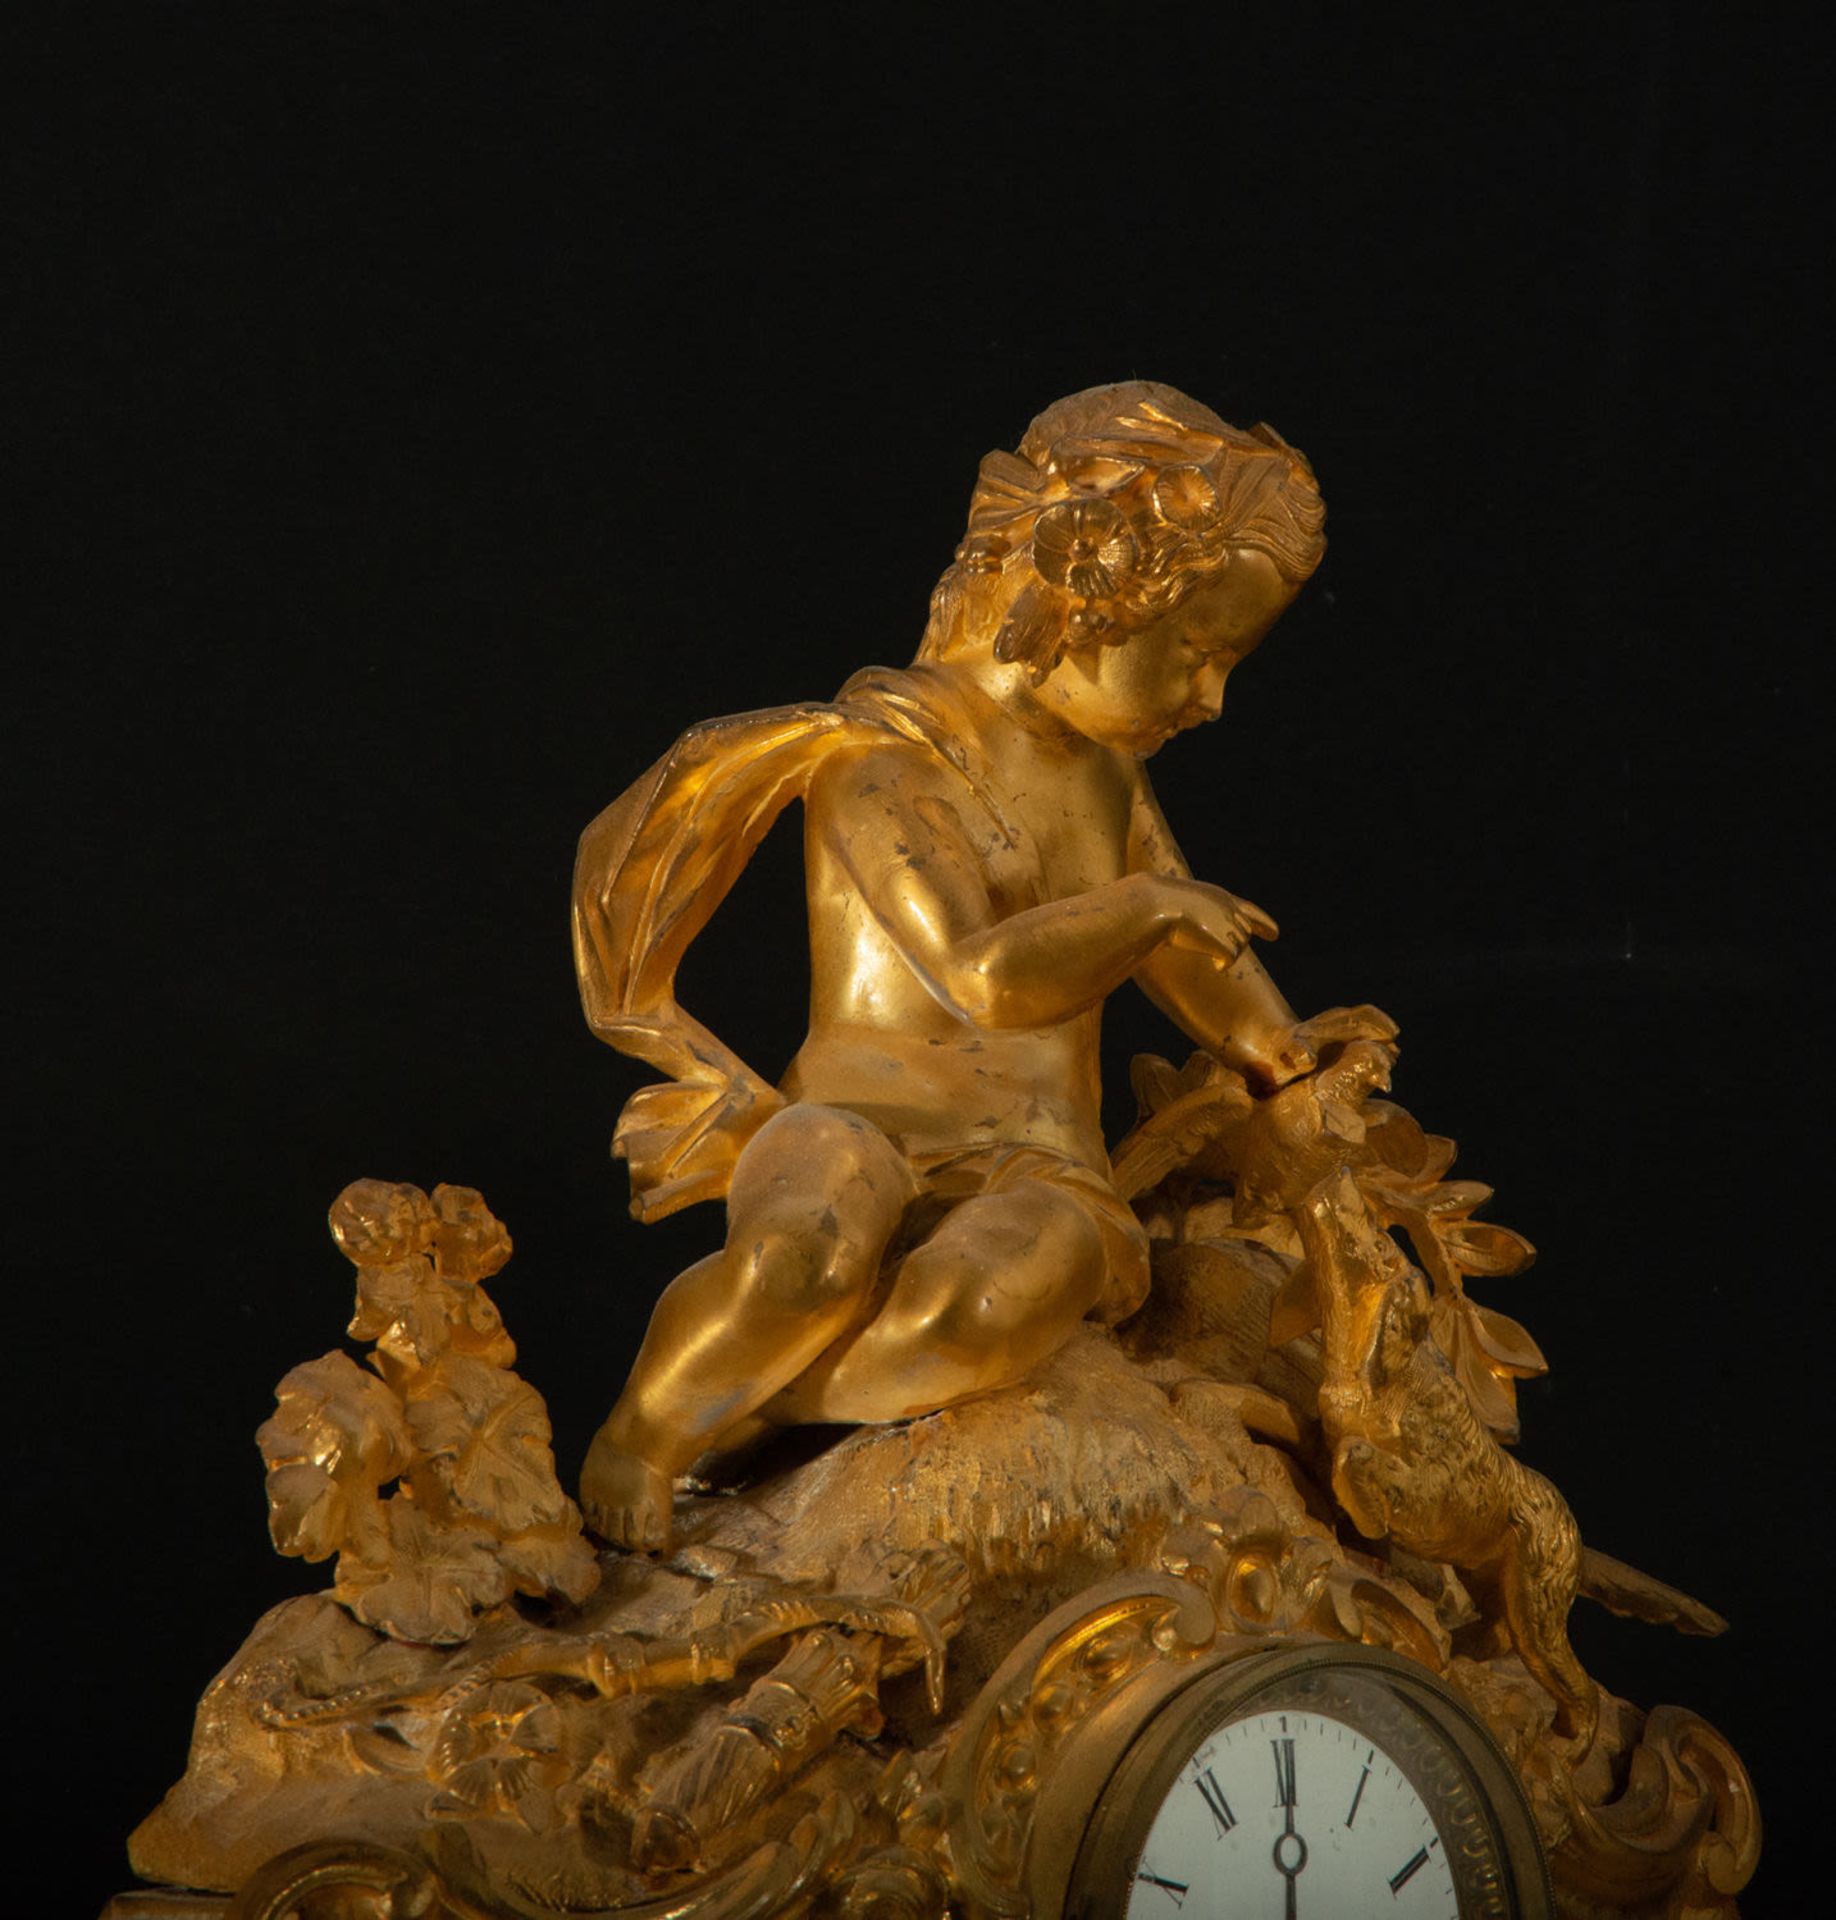 French Table Clock with Cherub, 19th century - Image 4 of 6